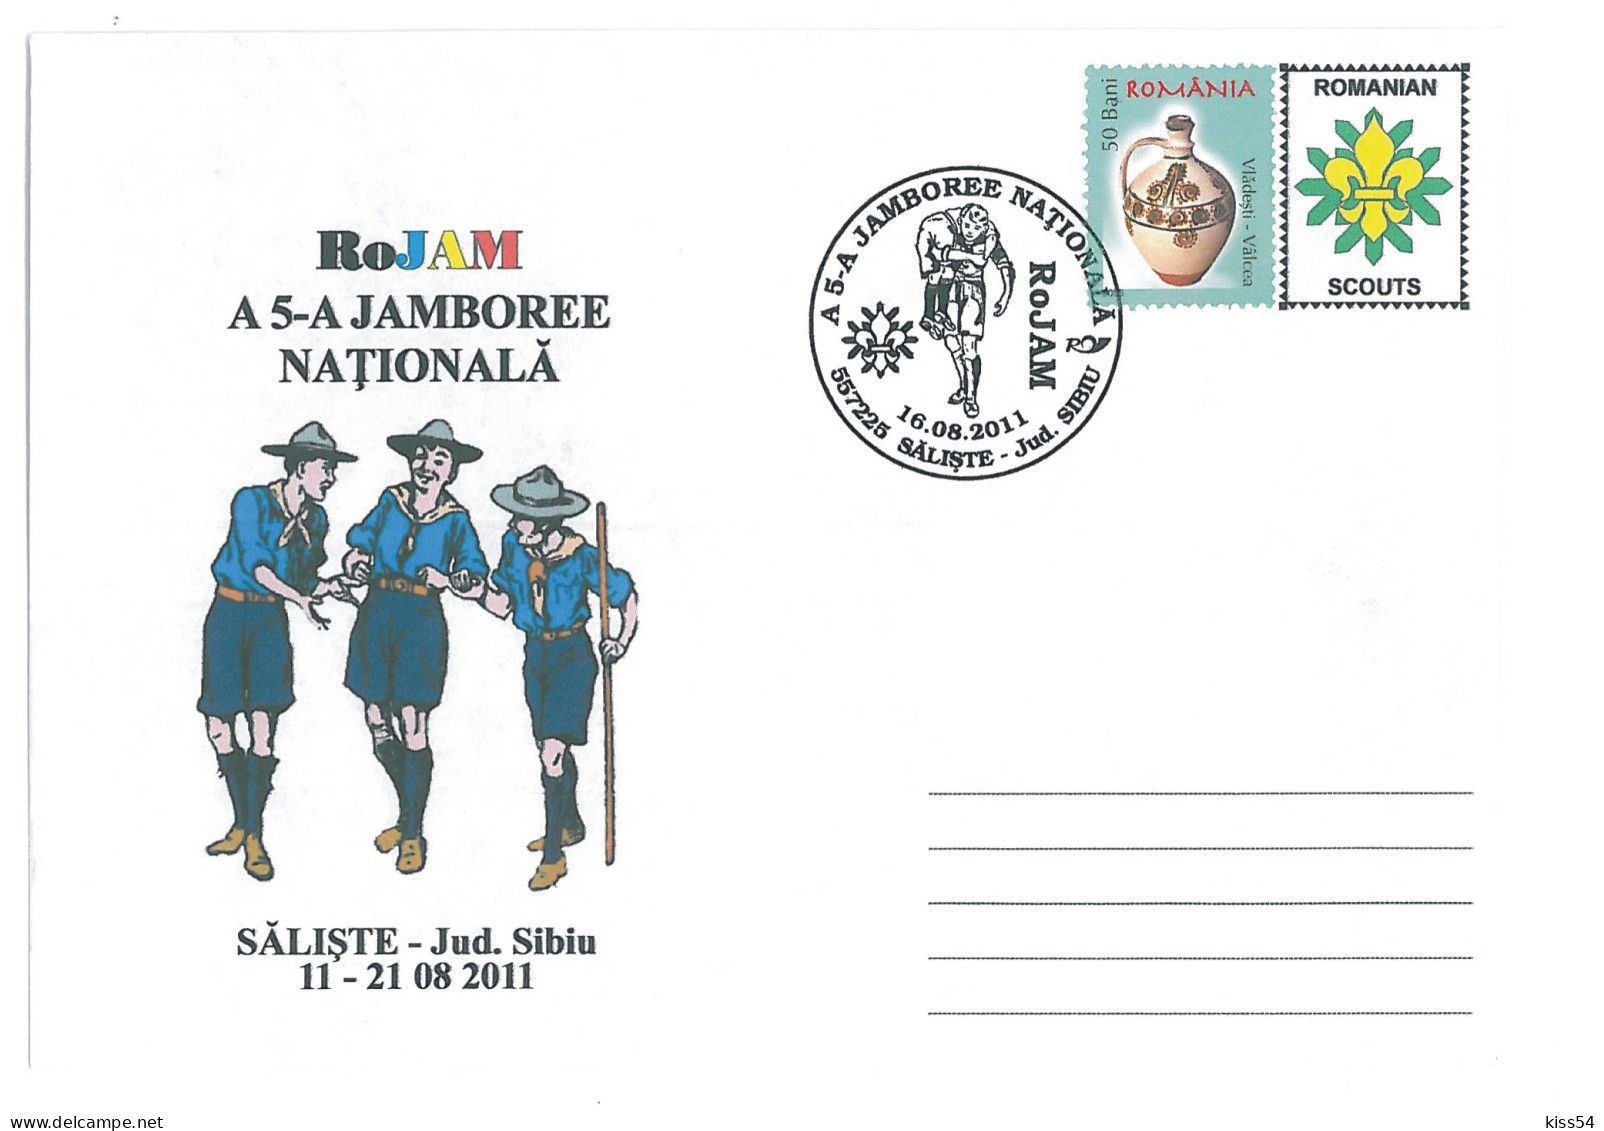 SC 47 - 1303 ROMANIA, National JAMBOREE, Scout - Cover - Used - 2011 - Lettres & Documents